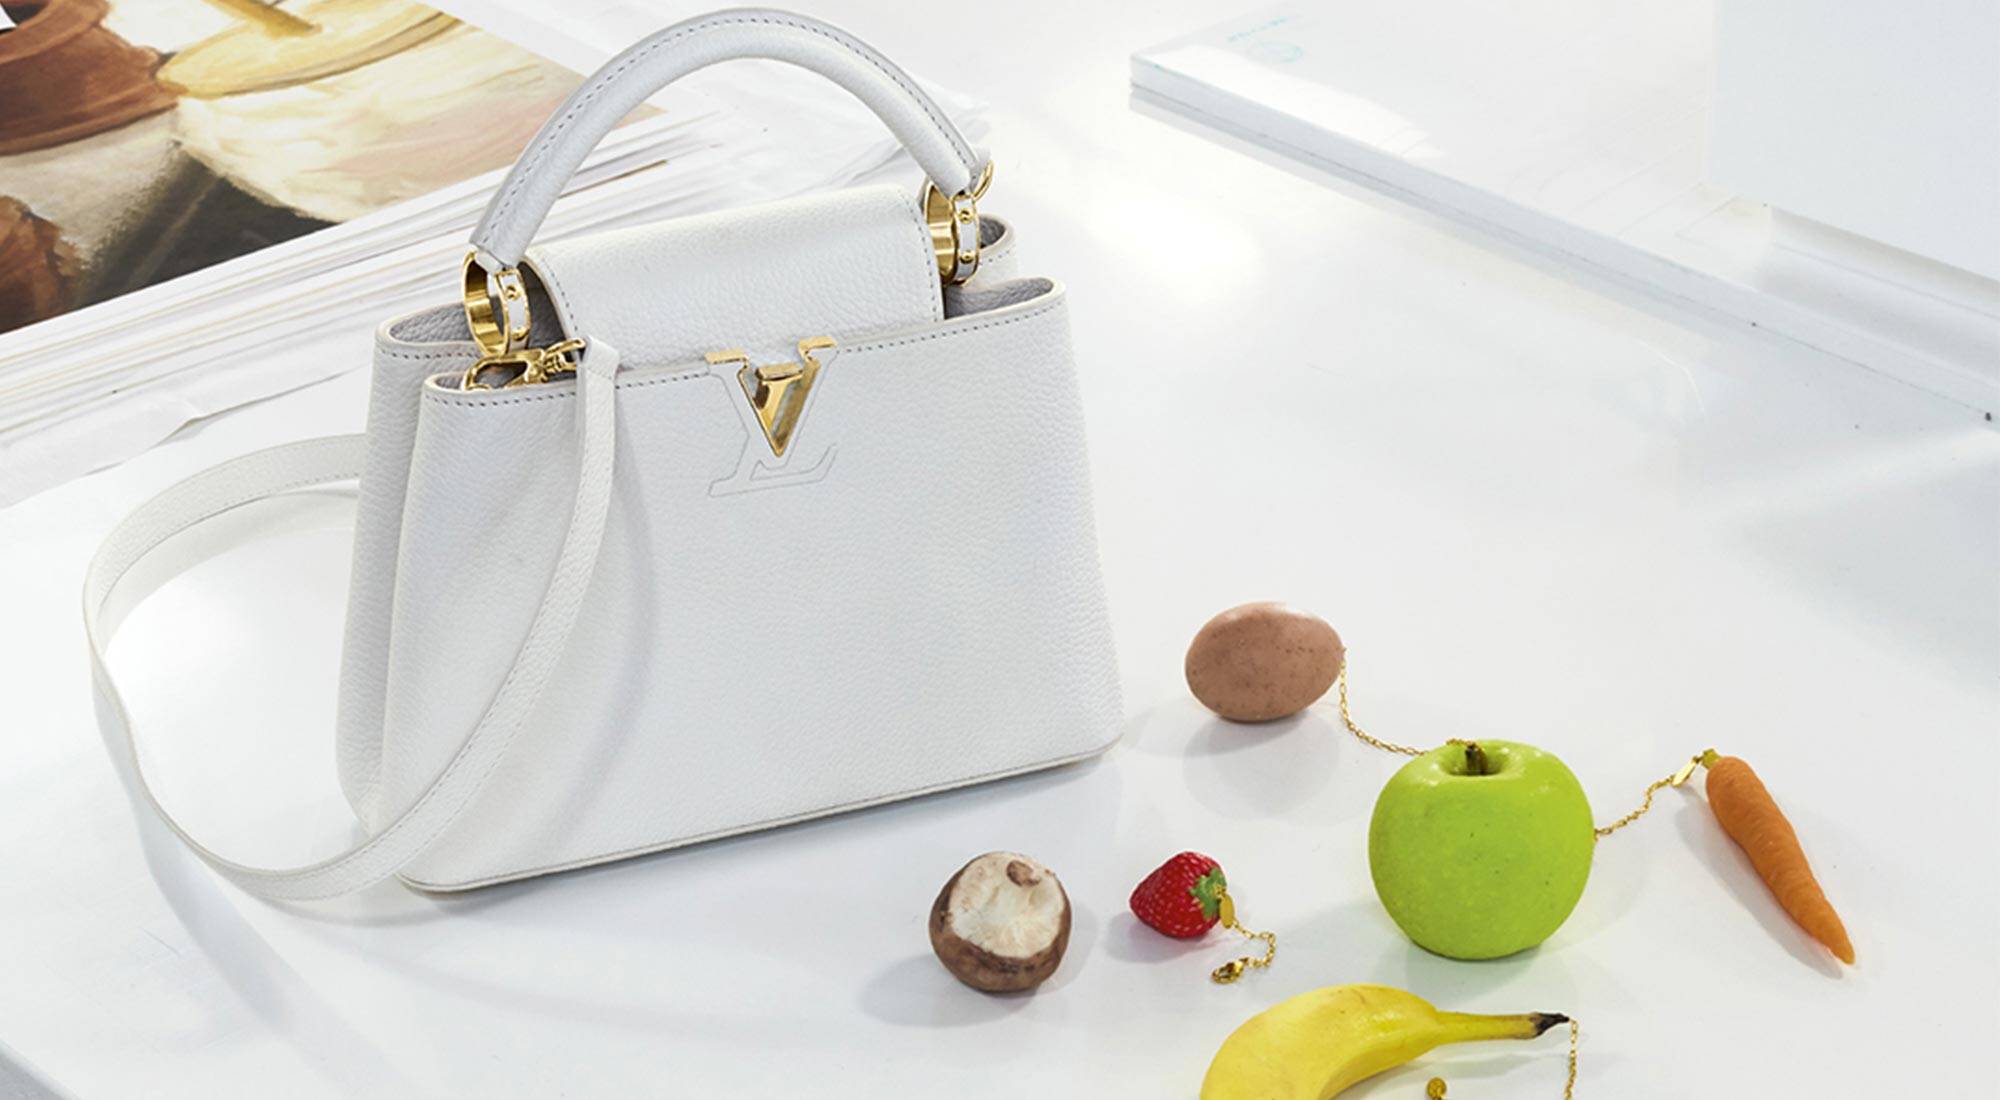 You Can Hang the Produce Aisle From Urs Fischer's Louis Vuitton Bag